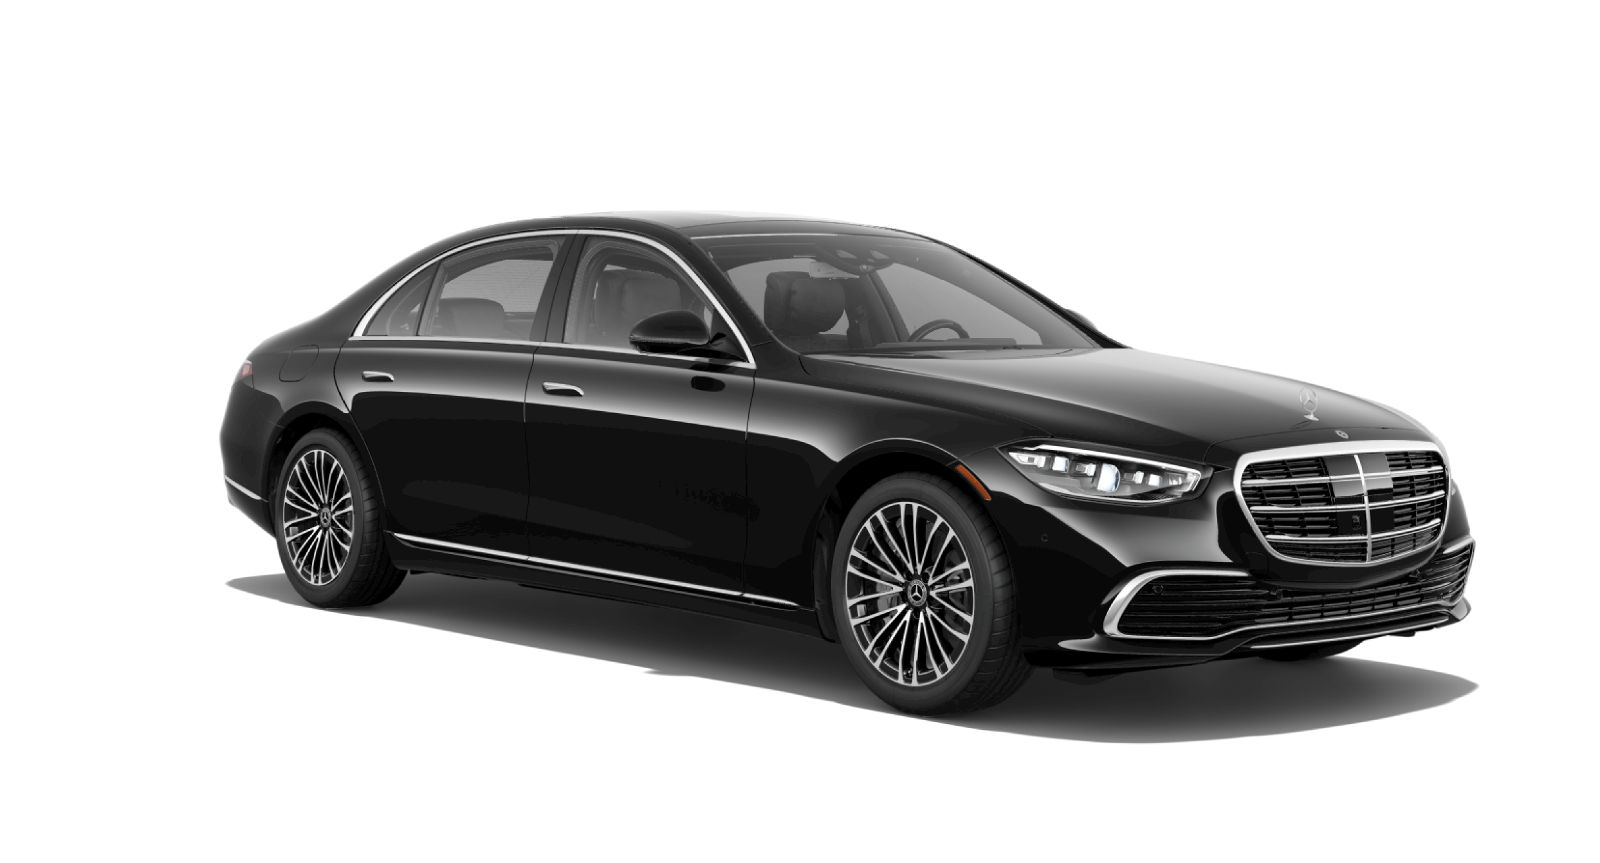 Driving The Mercedes S Class 580e PHEV Unveiled: Uncover Auto Excellence at Autoxyon